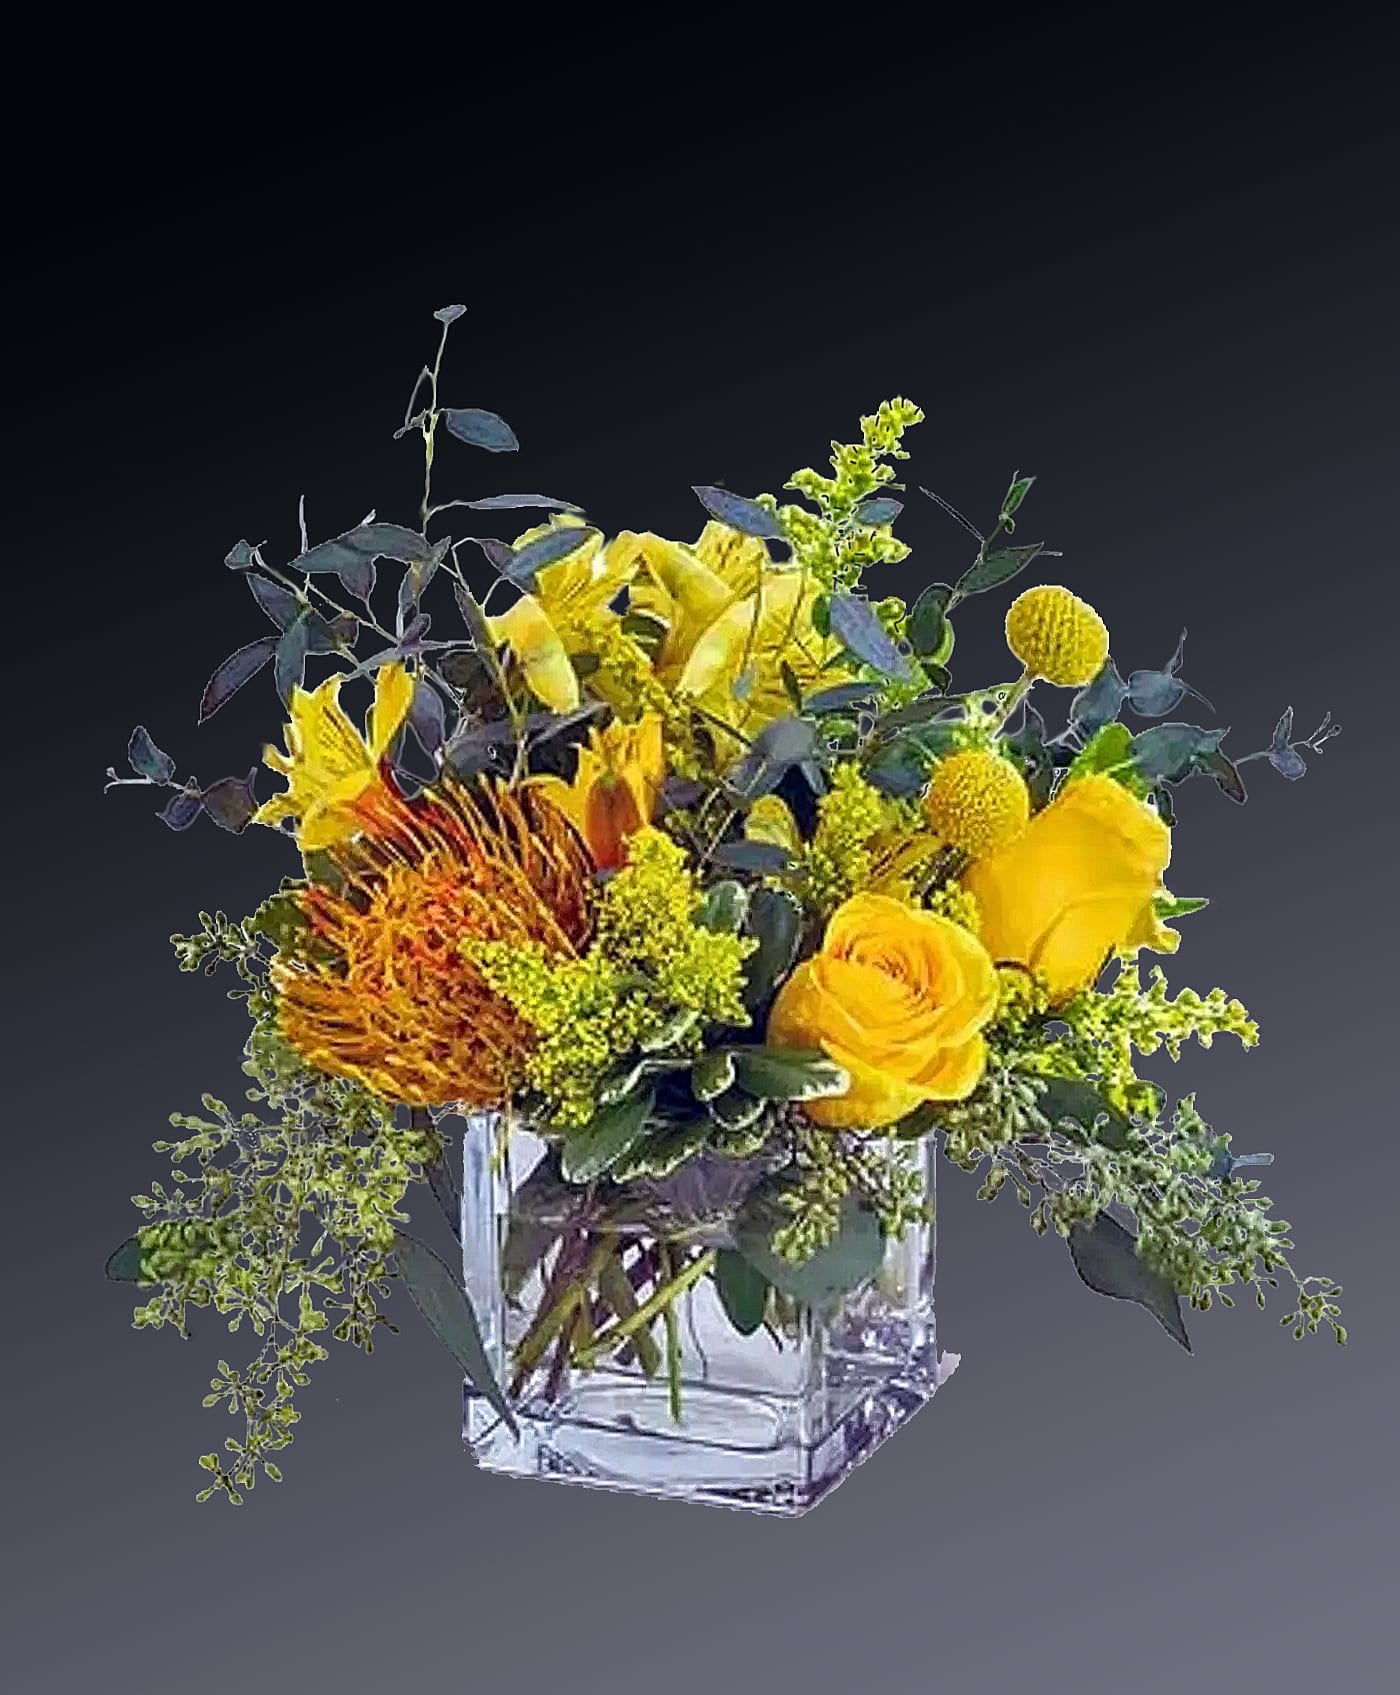 summer Fling - You can't help but smile at these bright, beautiful blooms! Like a ray of sunshine, this golden mix of roses and tropical in a square cube, will put anyone in a marvelous mood.